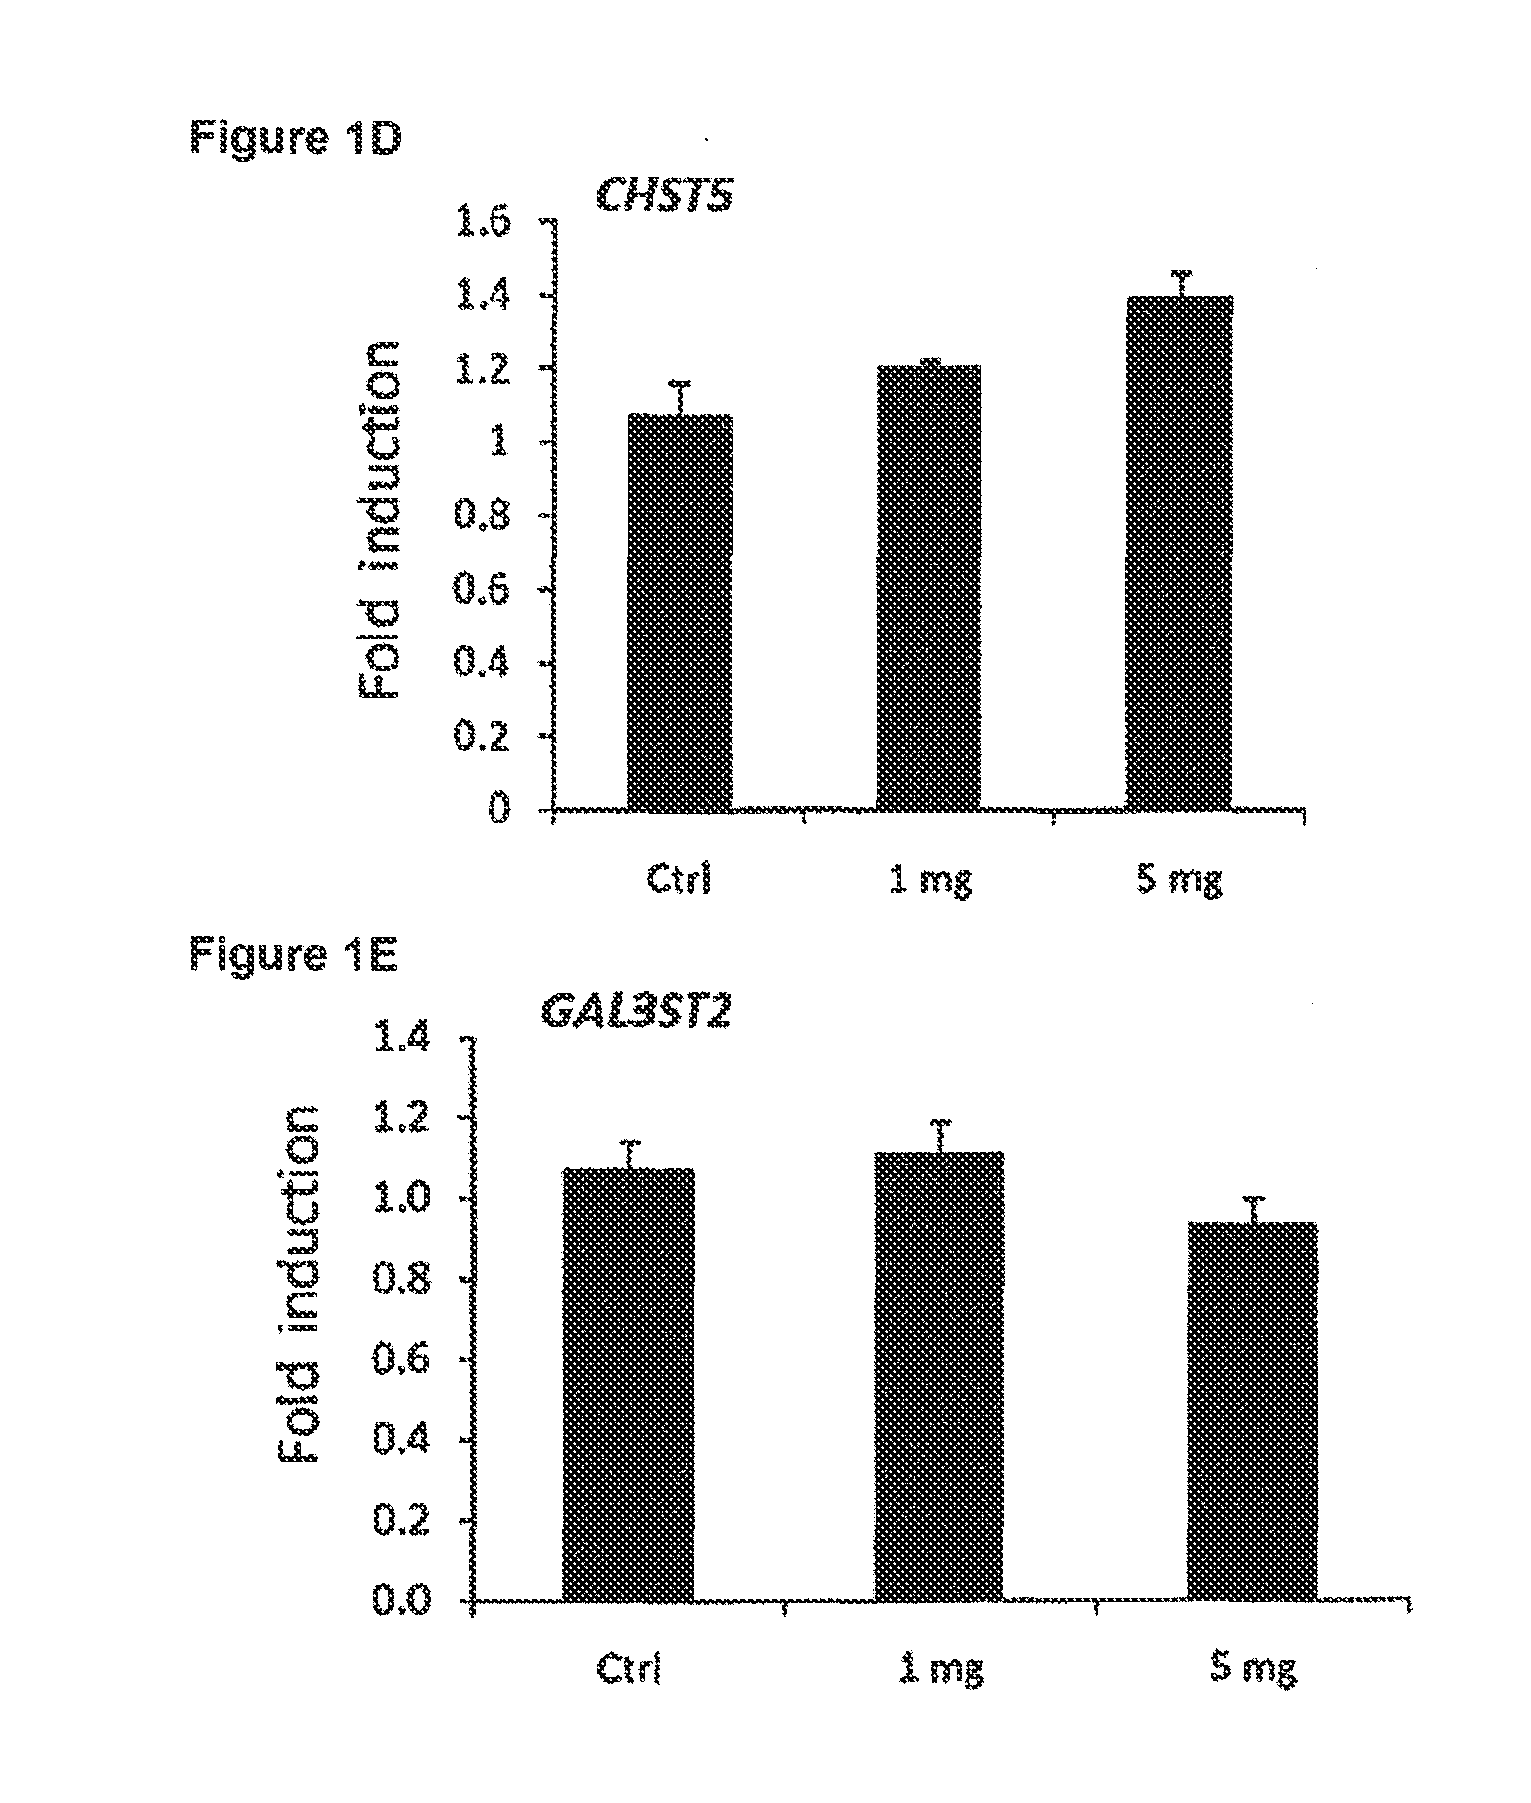 Human milk oligosaccharides for preventing injury and/or promoting healing of the gastrointestinal tract